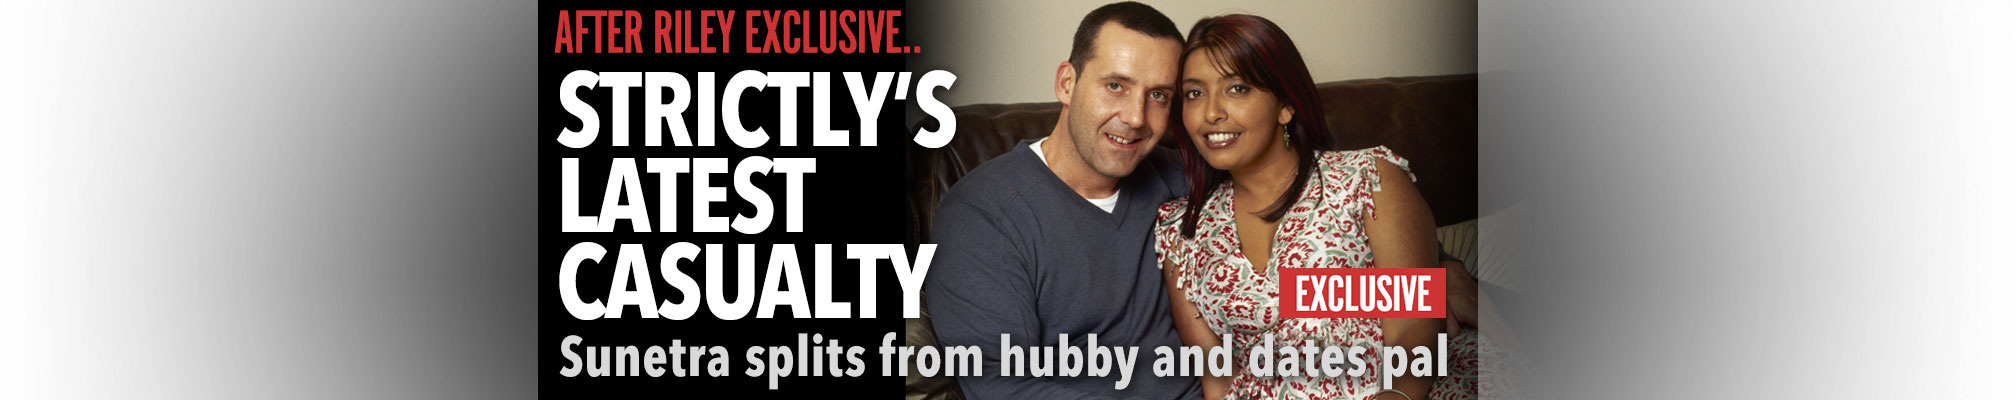 Strictly’s Sunetra splits from hubby